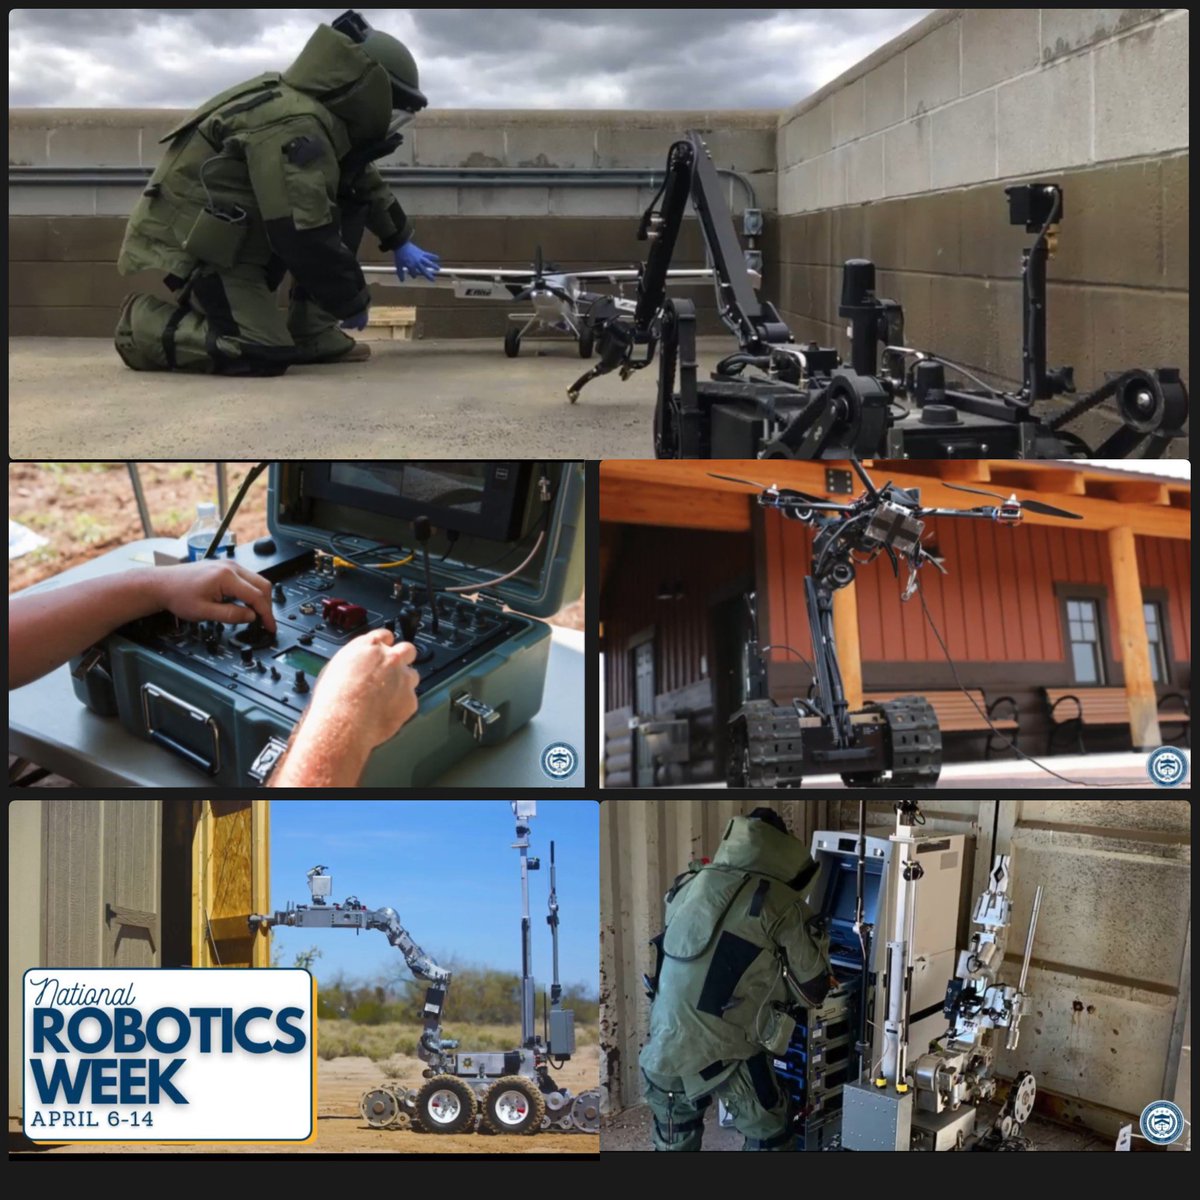 Happy #NationalRoboticsWeek! #DYK that ATF bomb technicians rely on robotics to support investigations & training exercises like Raven's Challenge? #STEM is unlocking endless possibilities in the world of robotics. More at atf.gov/careers/forens… & atf.gov/careers/agent-… #ATF